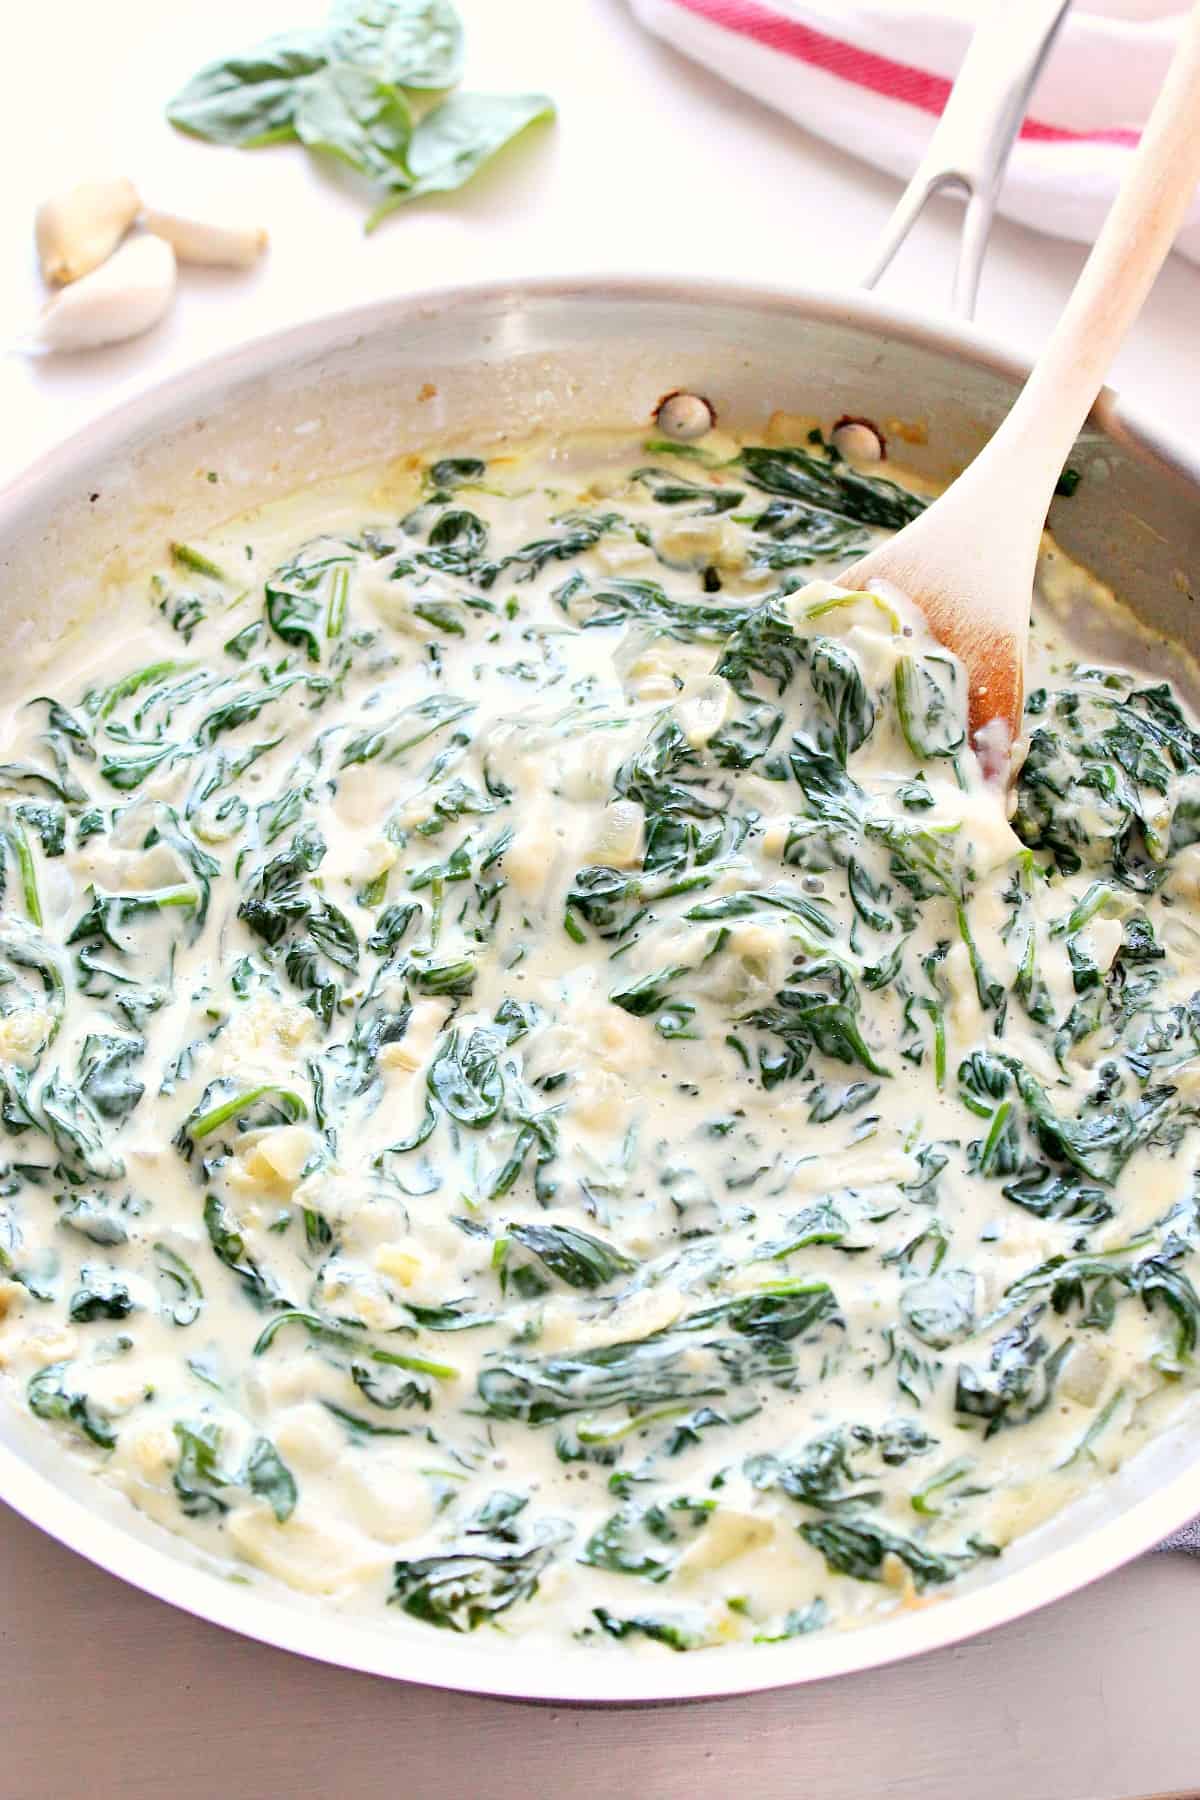 Creamy spinach in a skillet with wooden spoon.